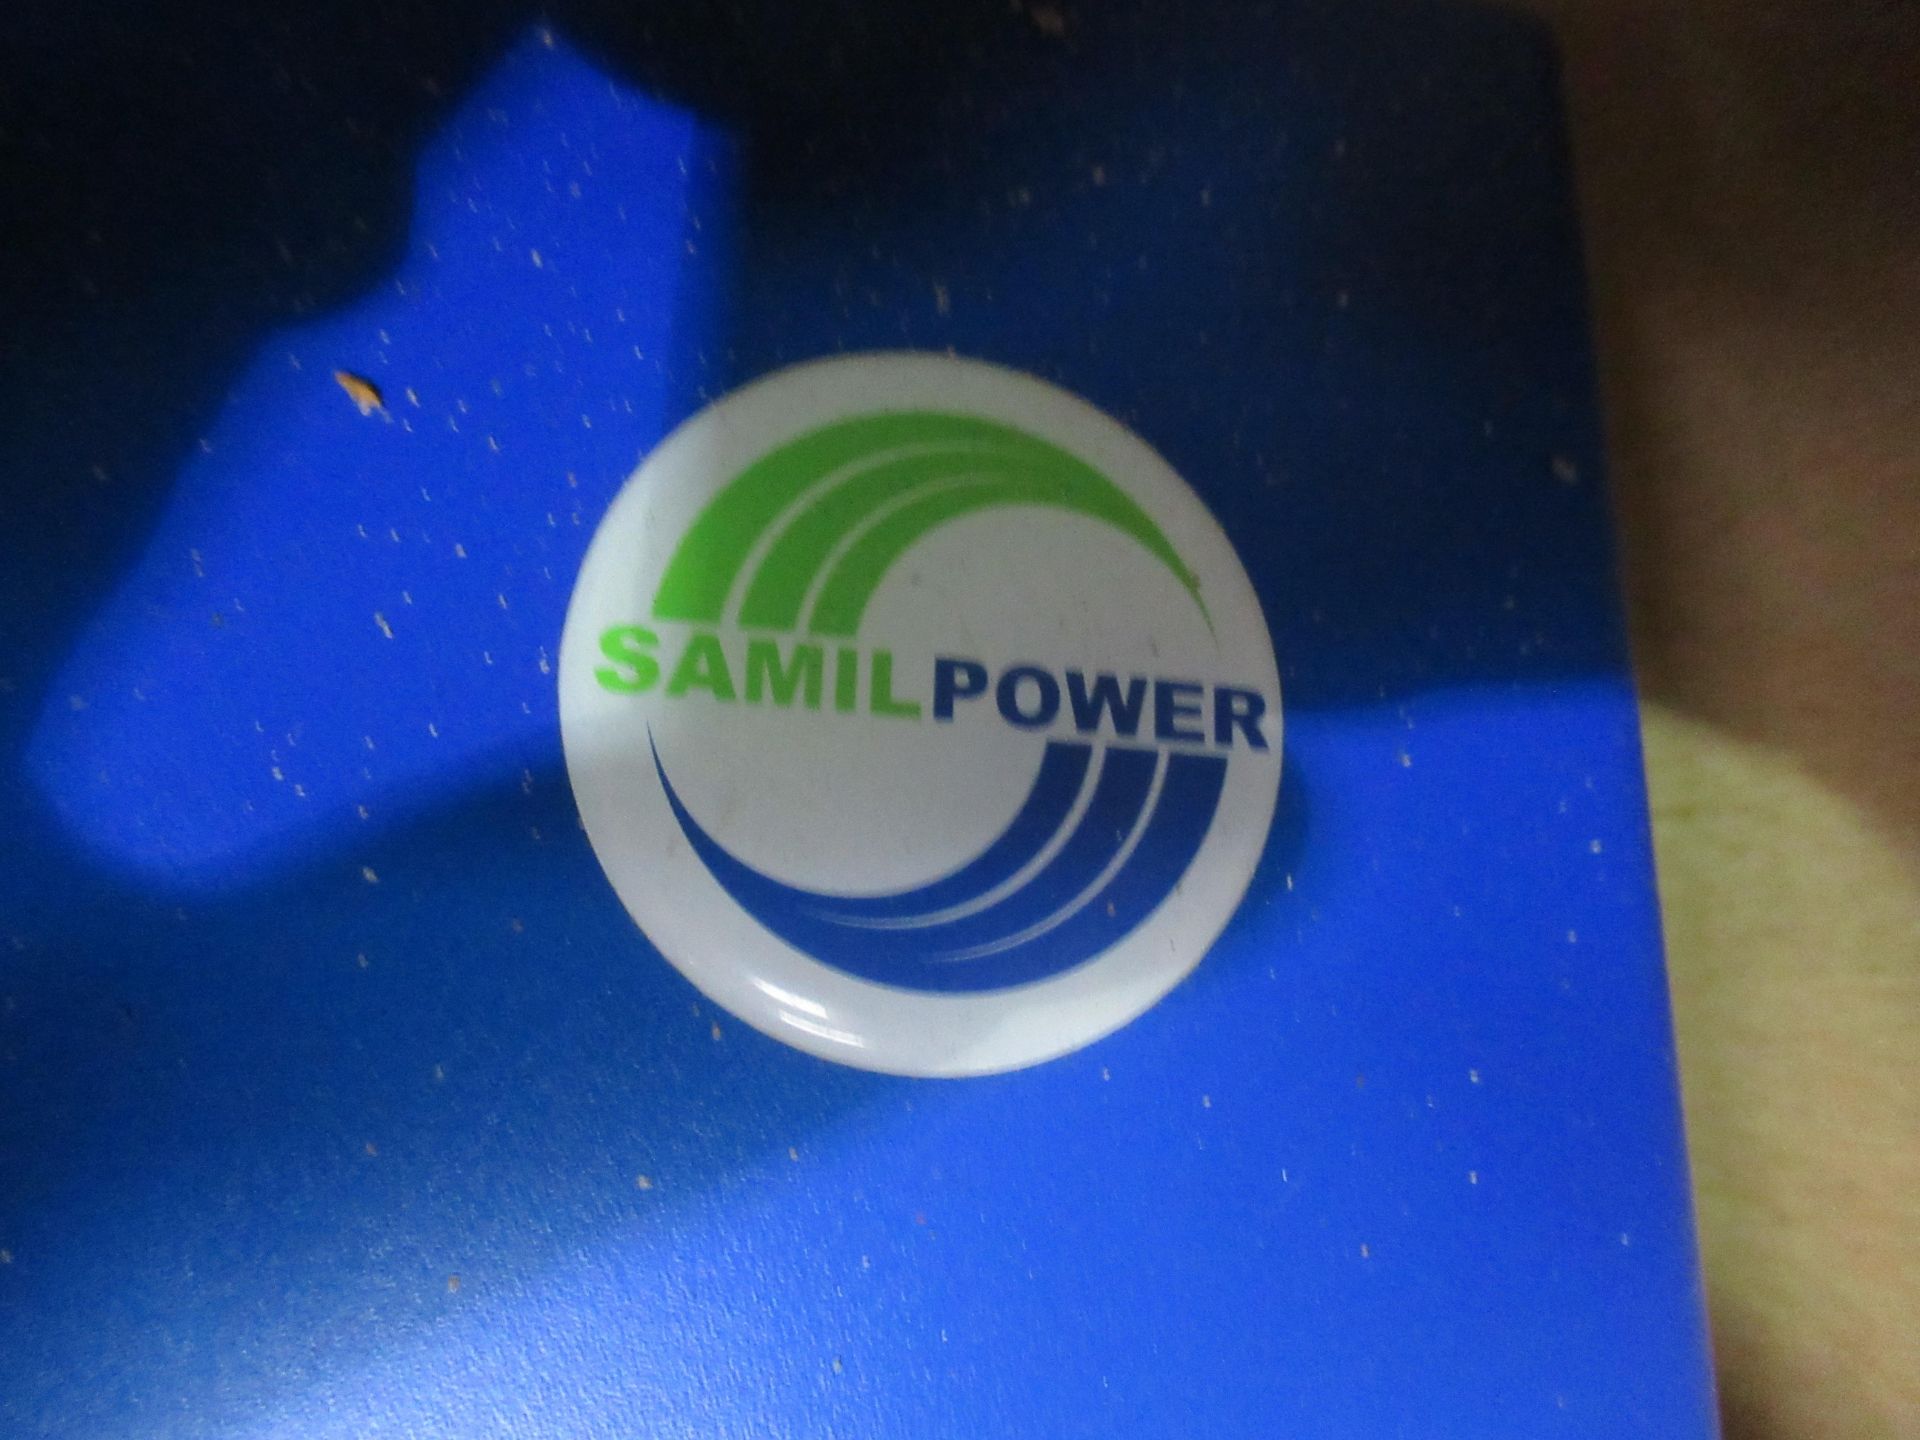 A small power 'solor inverter' - Image 3 of 4